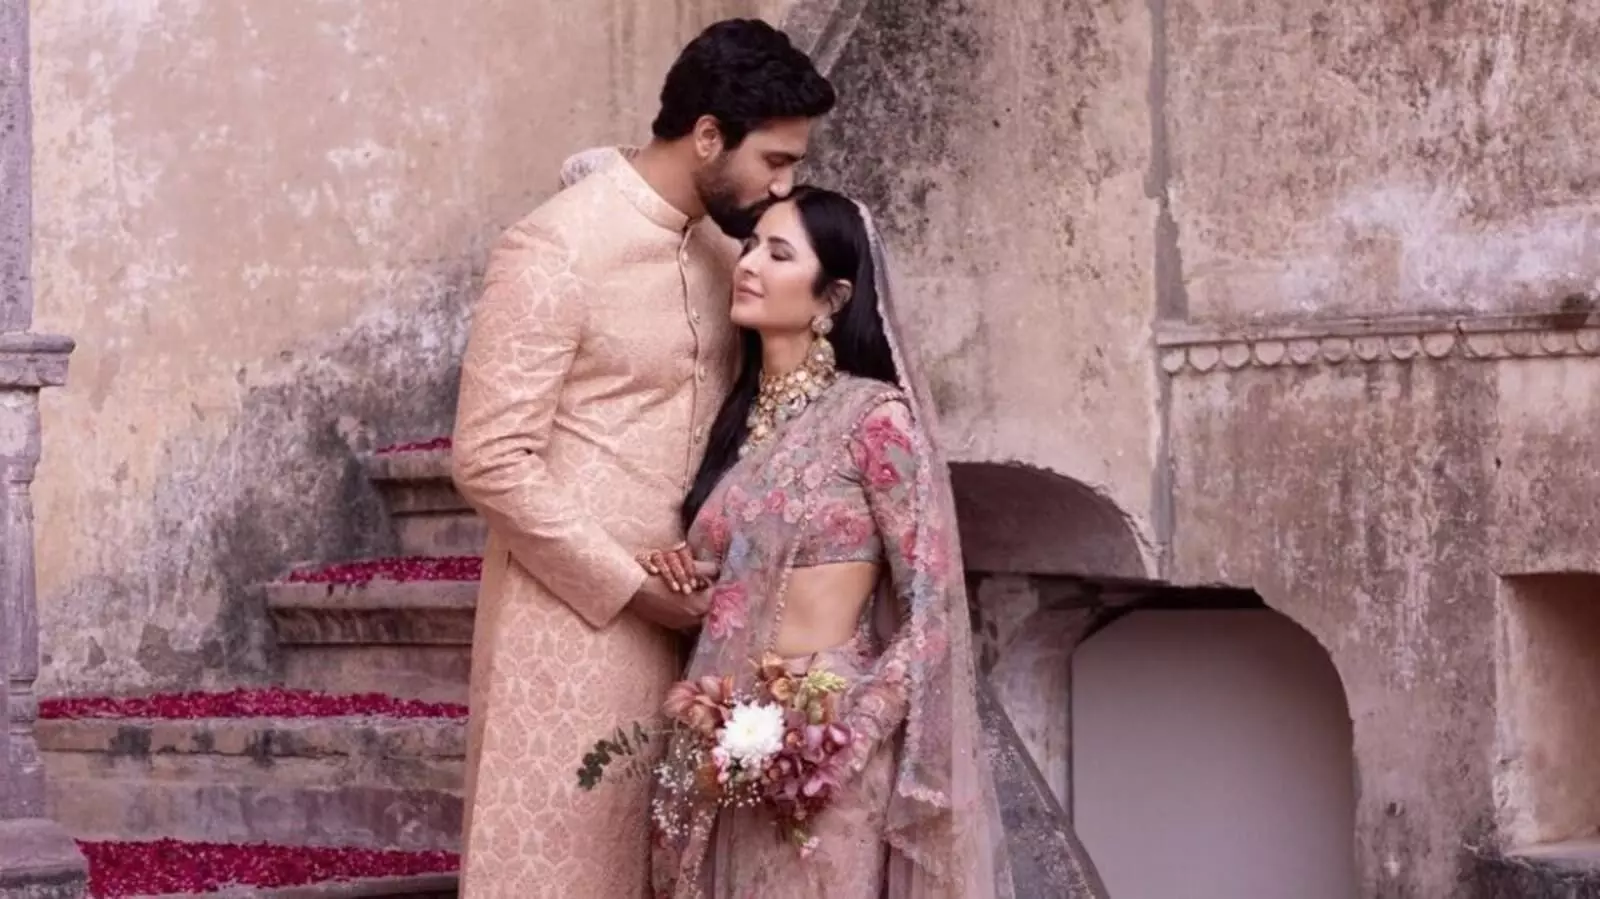 Katrina Kaif and Vicky Kaushal share their most romantic pics yet from wedding